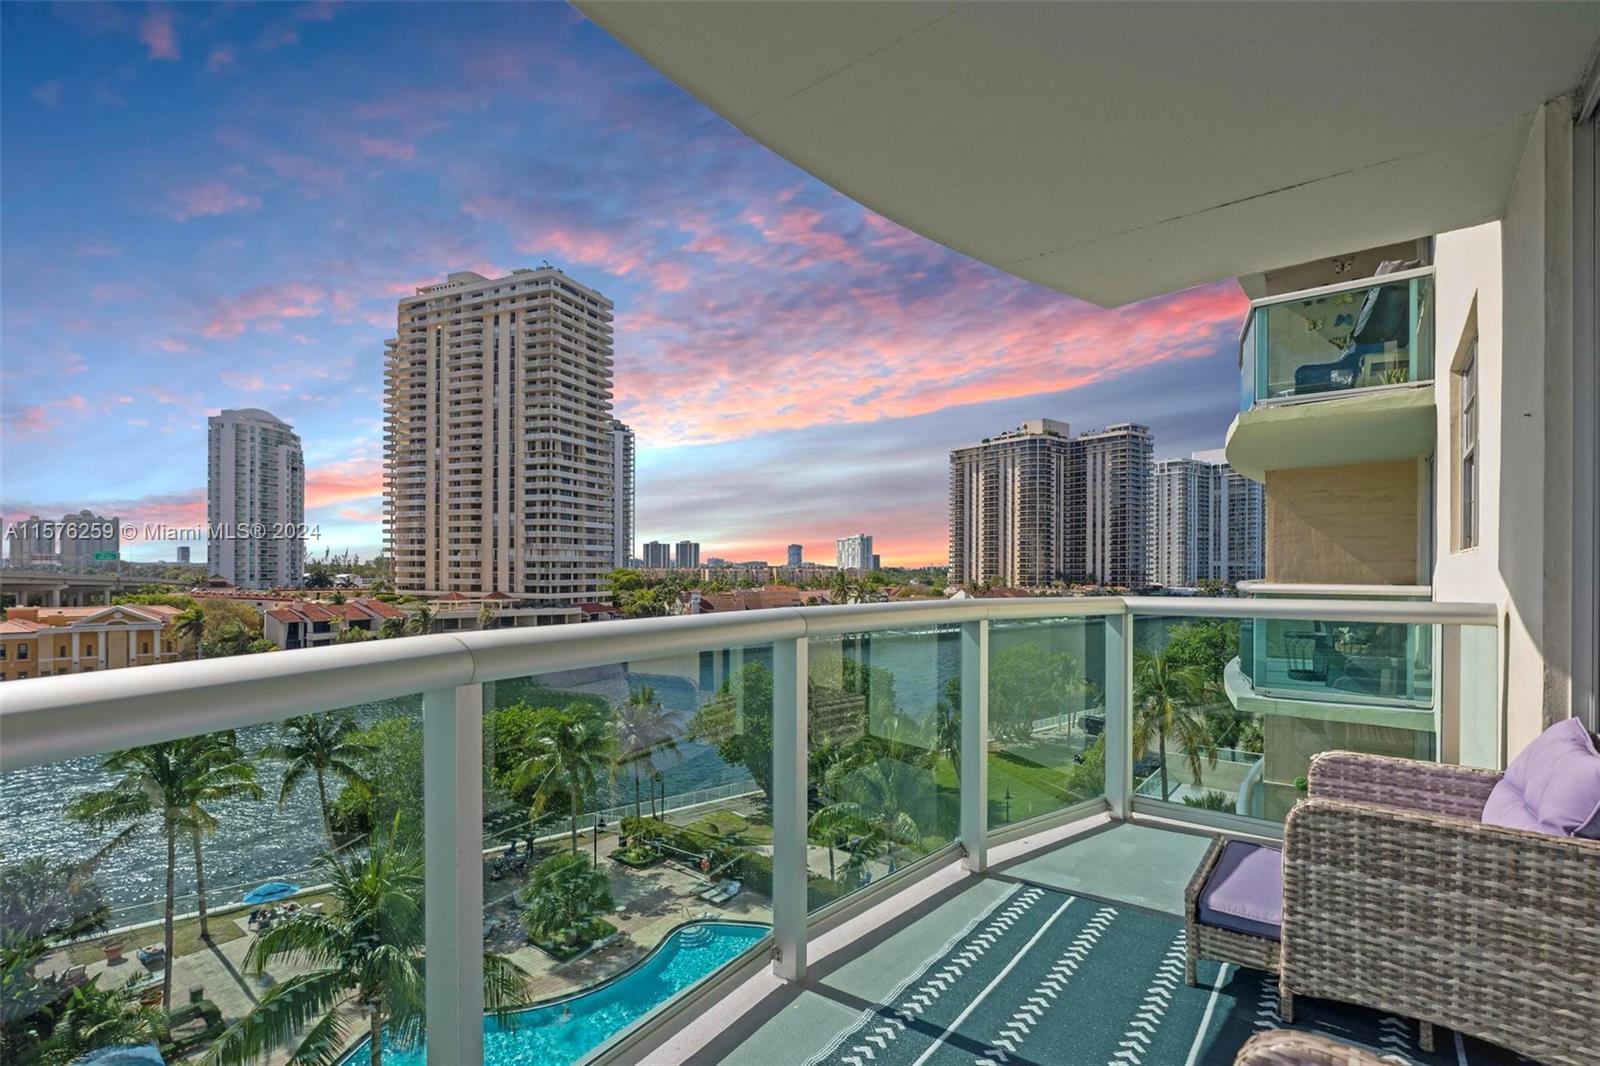 Photo of 19390 Collins Ave #701 in Sunny Isles Beach, FL